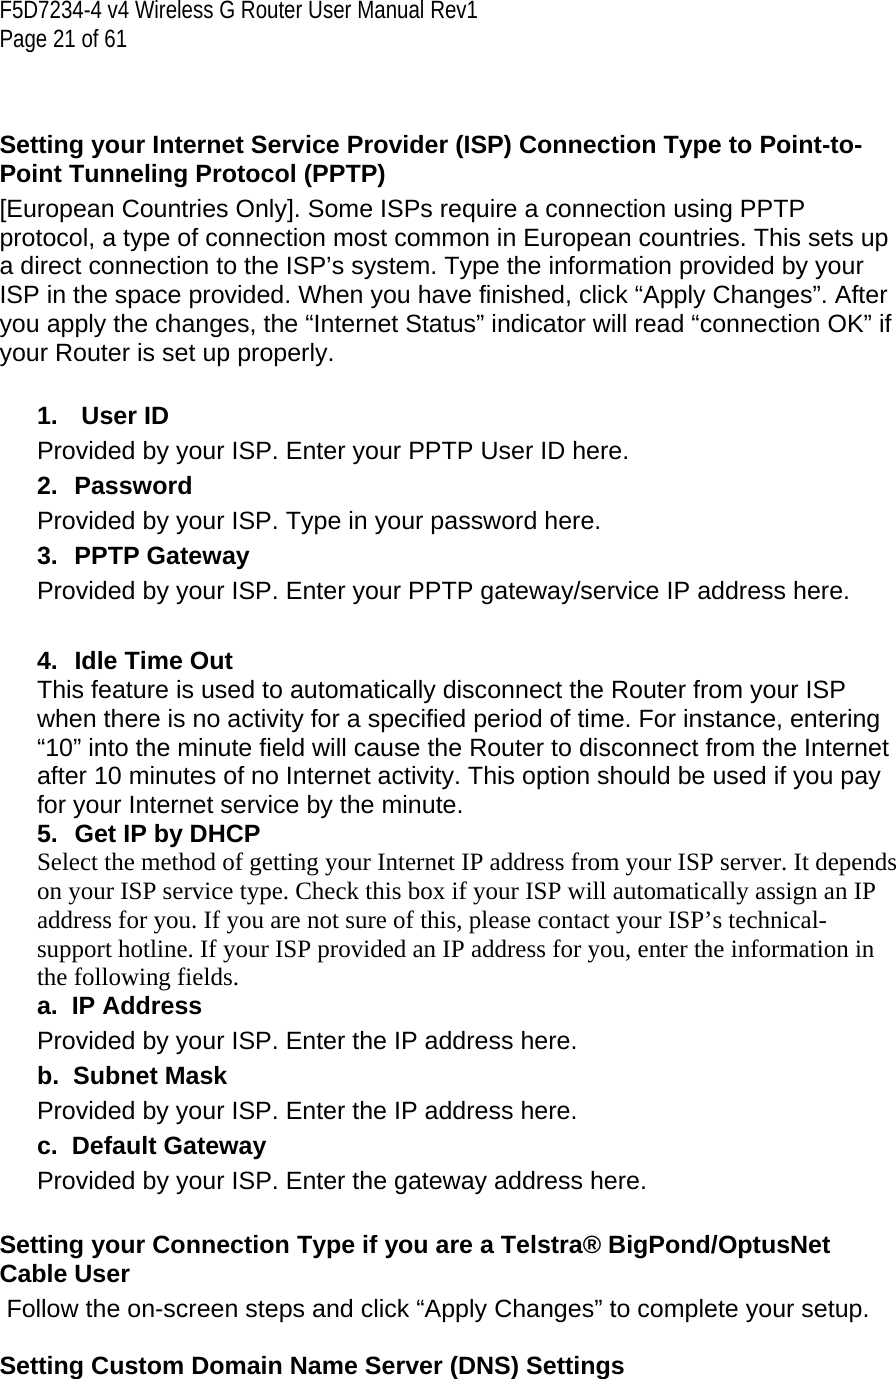 F5D7234-4 v4 Wireless G Router User Manual Rev1  Page 21 of 61    Setting your Internet Service Provider (ISP) Connection Type to Point-to-Point Tunneling Protocol (PPTP) [European Countries Only]. Some ISPs require a connection using PPTP protocol, a type of connection most common in European countries. This sets up a direct connection to the ISP’s system. Type the information provided by your ISP in the space provided. When you have finished, click “Apply Changes”. After you apply the changes, the “Internet Status” indicator will read “connection OK” if your Router is set up properly.  1.   User ID Provided by your ISP. Enter your PPTP User ID here. 2. Password Provided by your ISP. Type in your password here. 3. PPTP Gateway Provided by your ISP. Enter your PPTP gateway/service IP address here.  4. Idle Time Out This feature is used to automatically disconnect the Router from your ISP when there is no activity for a specified period of time. For instance, entering “10” into the minute field will cause the Router to disconnect from the Internet after 10 minutes of no Internet activity. This option should be used if you pay for your Internet service by the minute.5.  Get IP by DHCP Select the method of getting your Internet IP address from your ISP server. It depends on your ISP service type. Check this box if your ISP will automatically assign an IP address for you. If you are not sure of this, please contact your ISP’s technical-support hotline. If your ISP provided an IP address for you, enter the information in the following fields. a.  IP Address Provided by your ISP. Enter the IP address here. b.  Subnet Mask Provided by your ISP. Enter the IP address here. c.  Default Gateway Provided by your ISP. Enter the gateway address here.  Setting your Connection Type if you are a Telstra® BigPond/OptusNet Cable User  Follow the on-screen steps and click “Apply Changes” to complete your setup.  Setting Custom Domain Name Server (DNS) Settings 